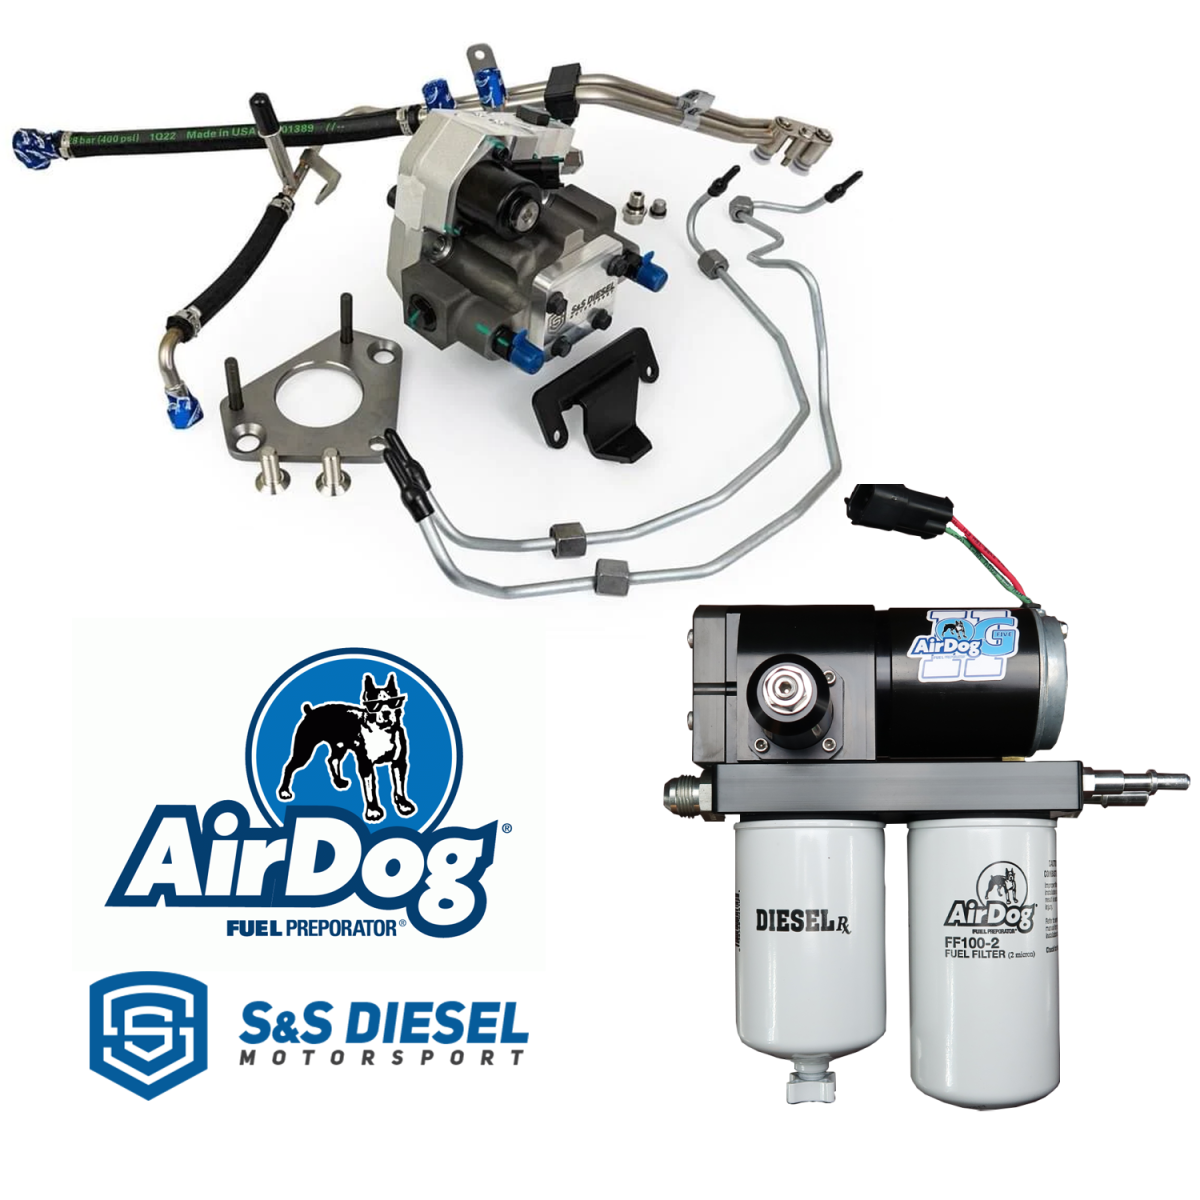 S&S Diesel - AirDog II 5G 165GPH Lift Pump & S&S CP4 To DCR Conversion Kit For 2011-2016 Ford 6.7L Powerstroke